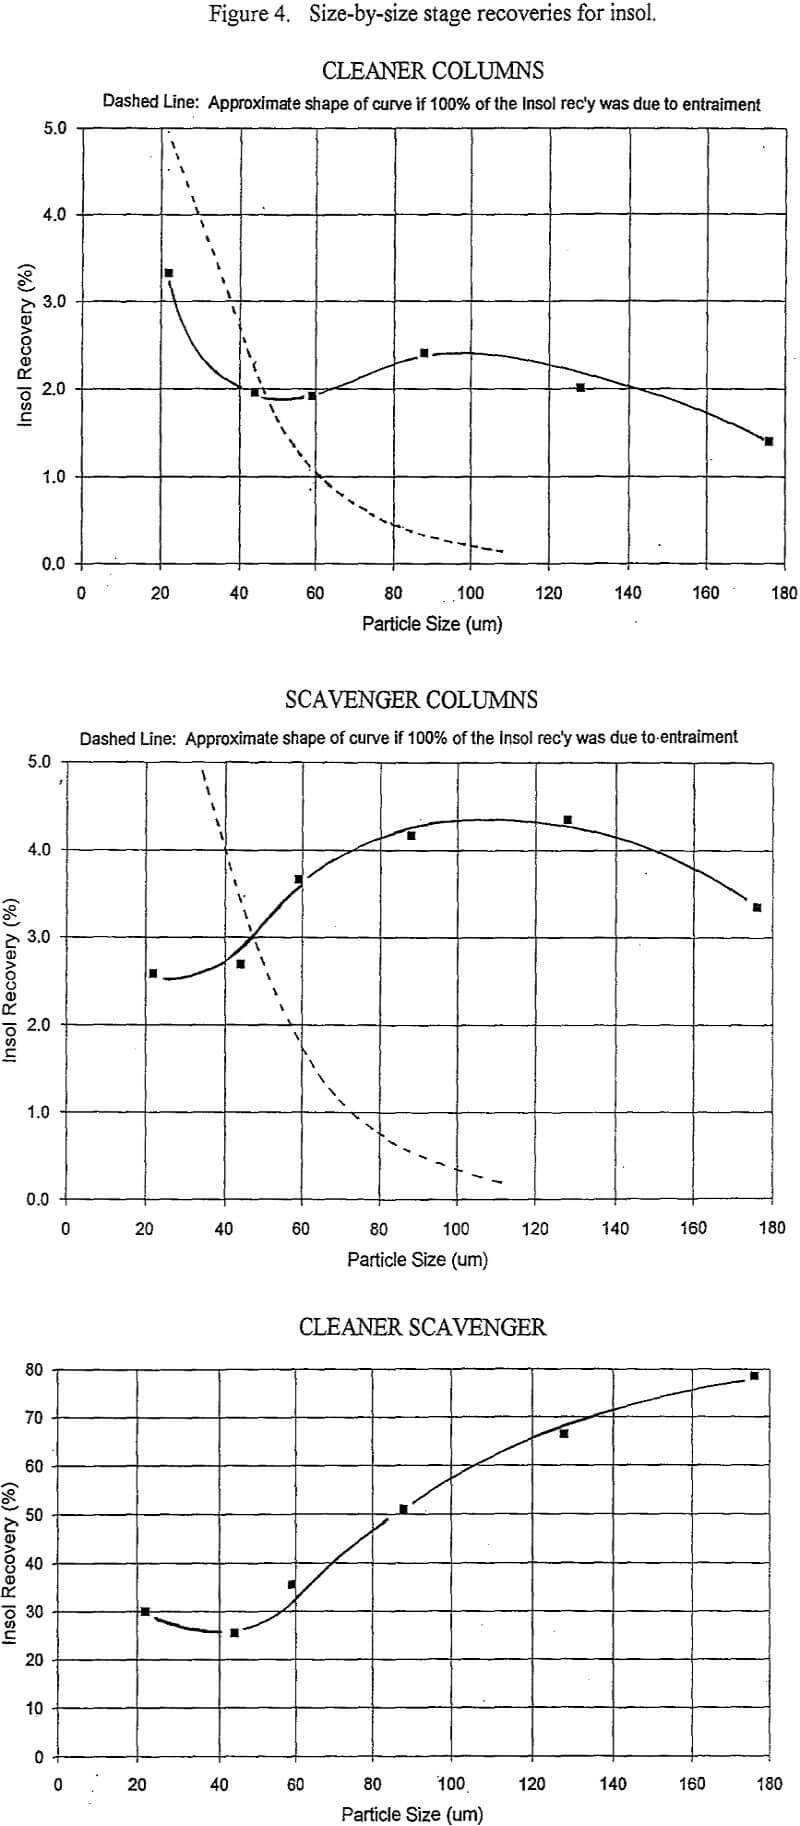 flotation column size-by-size stage recoveries